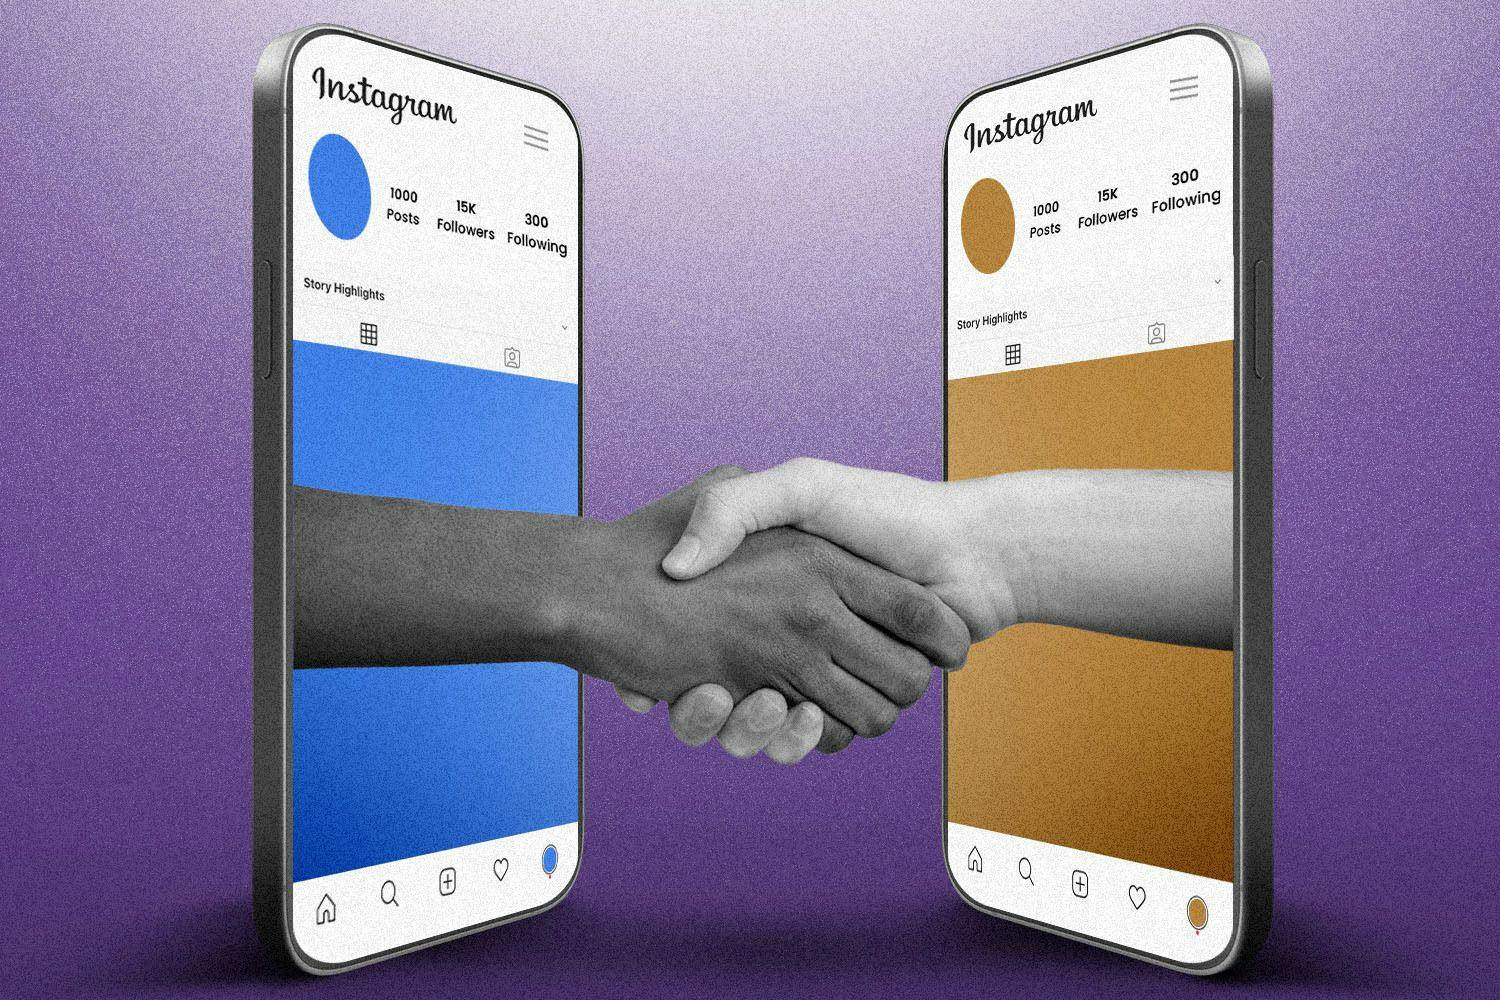 two phones with IG screens on them, hands coming out of each phone to shake hands